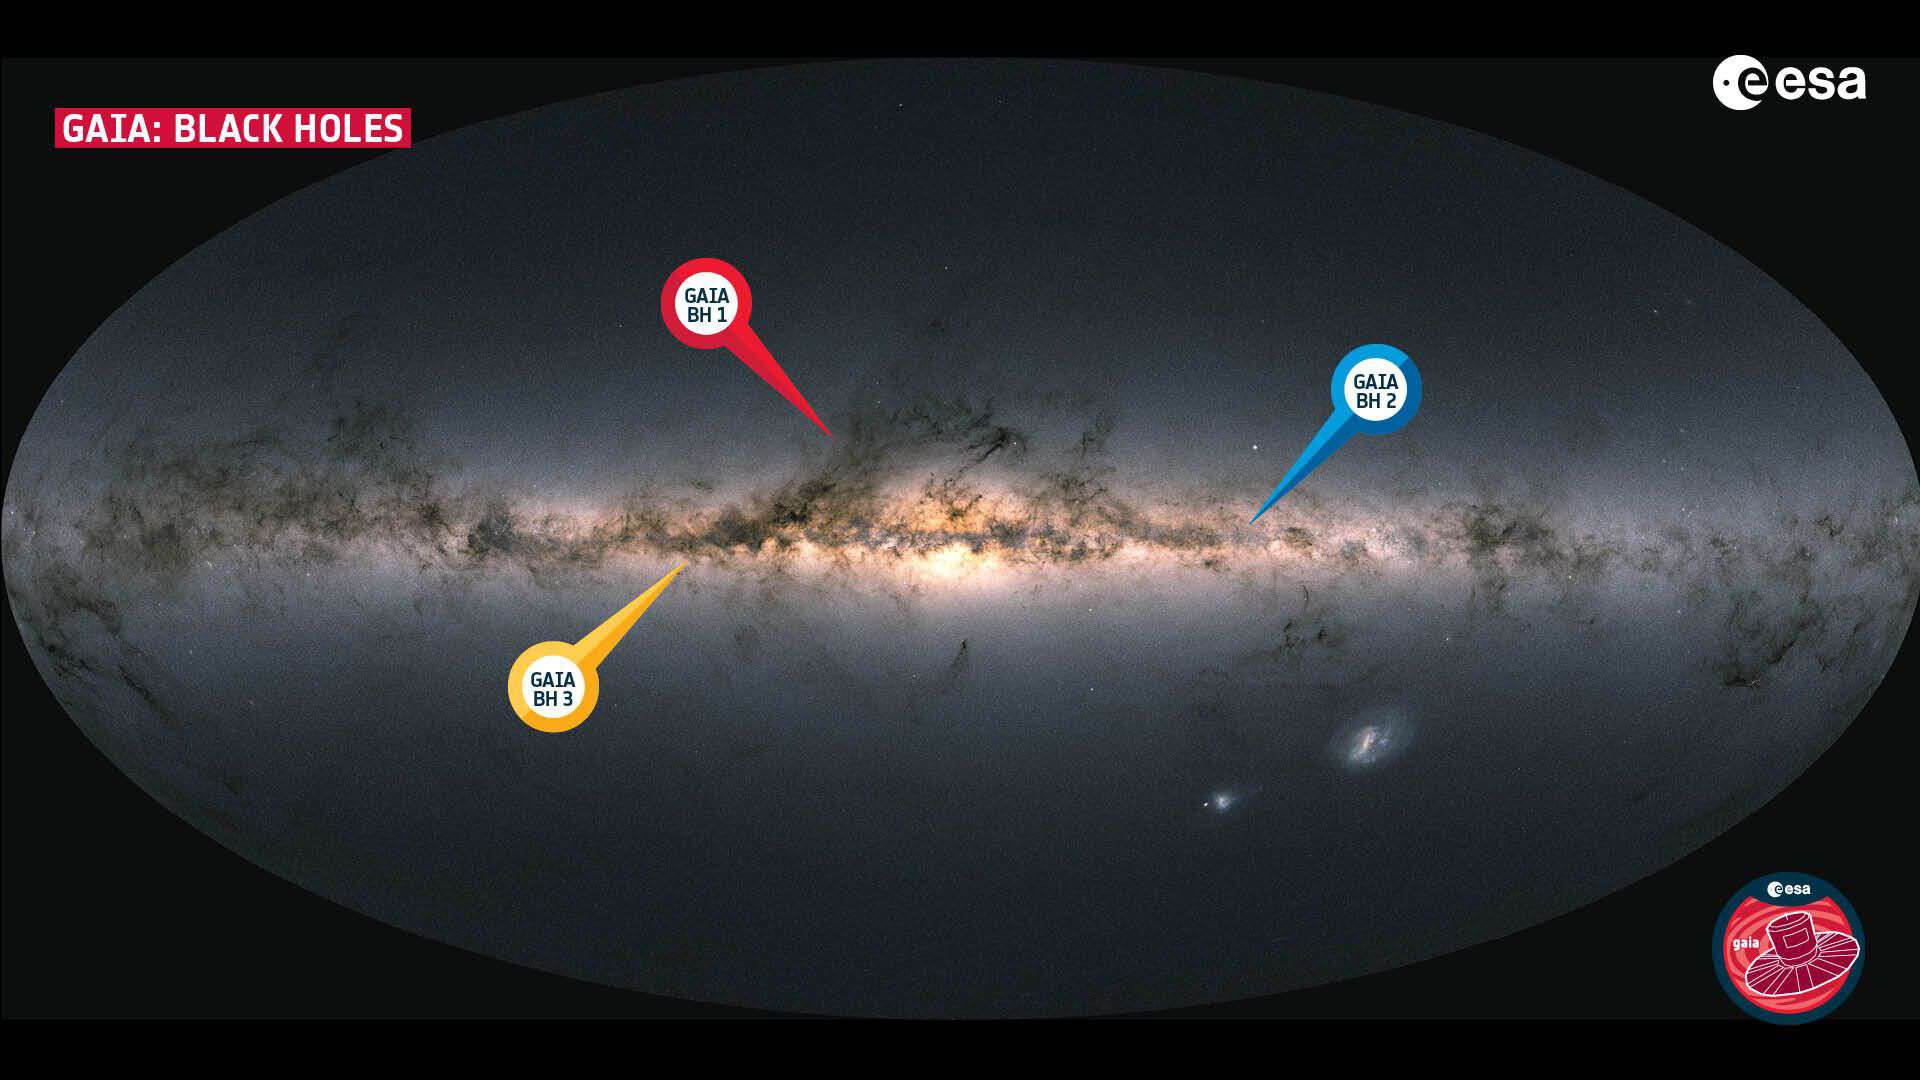 The location of the three black holes discovered by ESA’s Gaia mission is shown on the map of our Milky Way galaxy